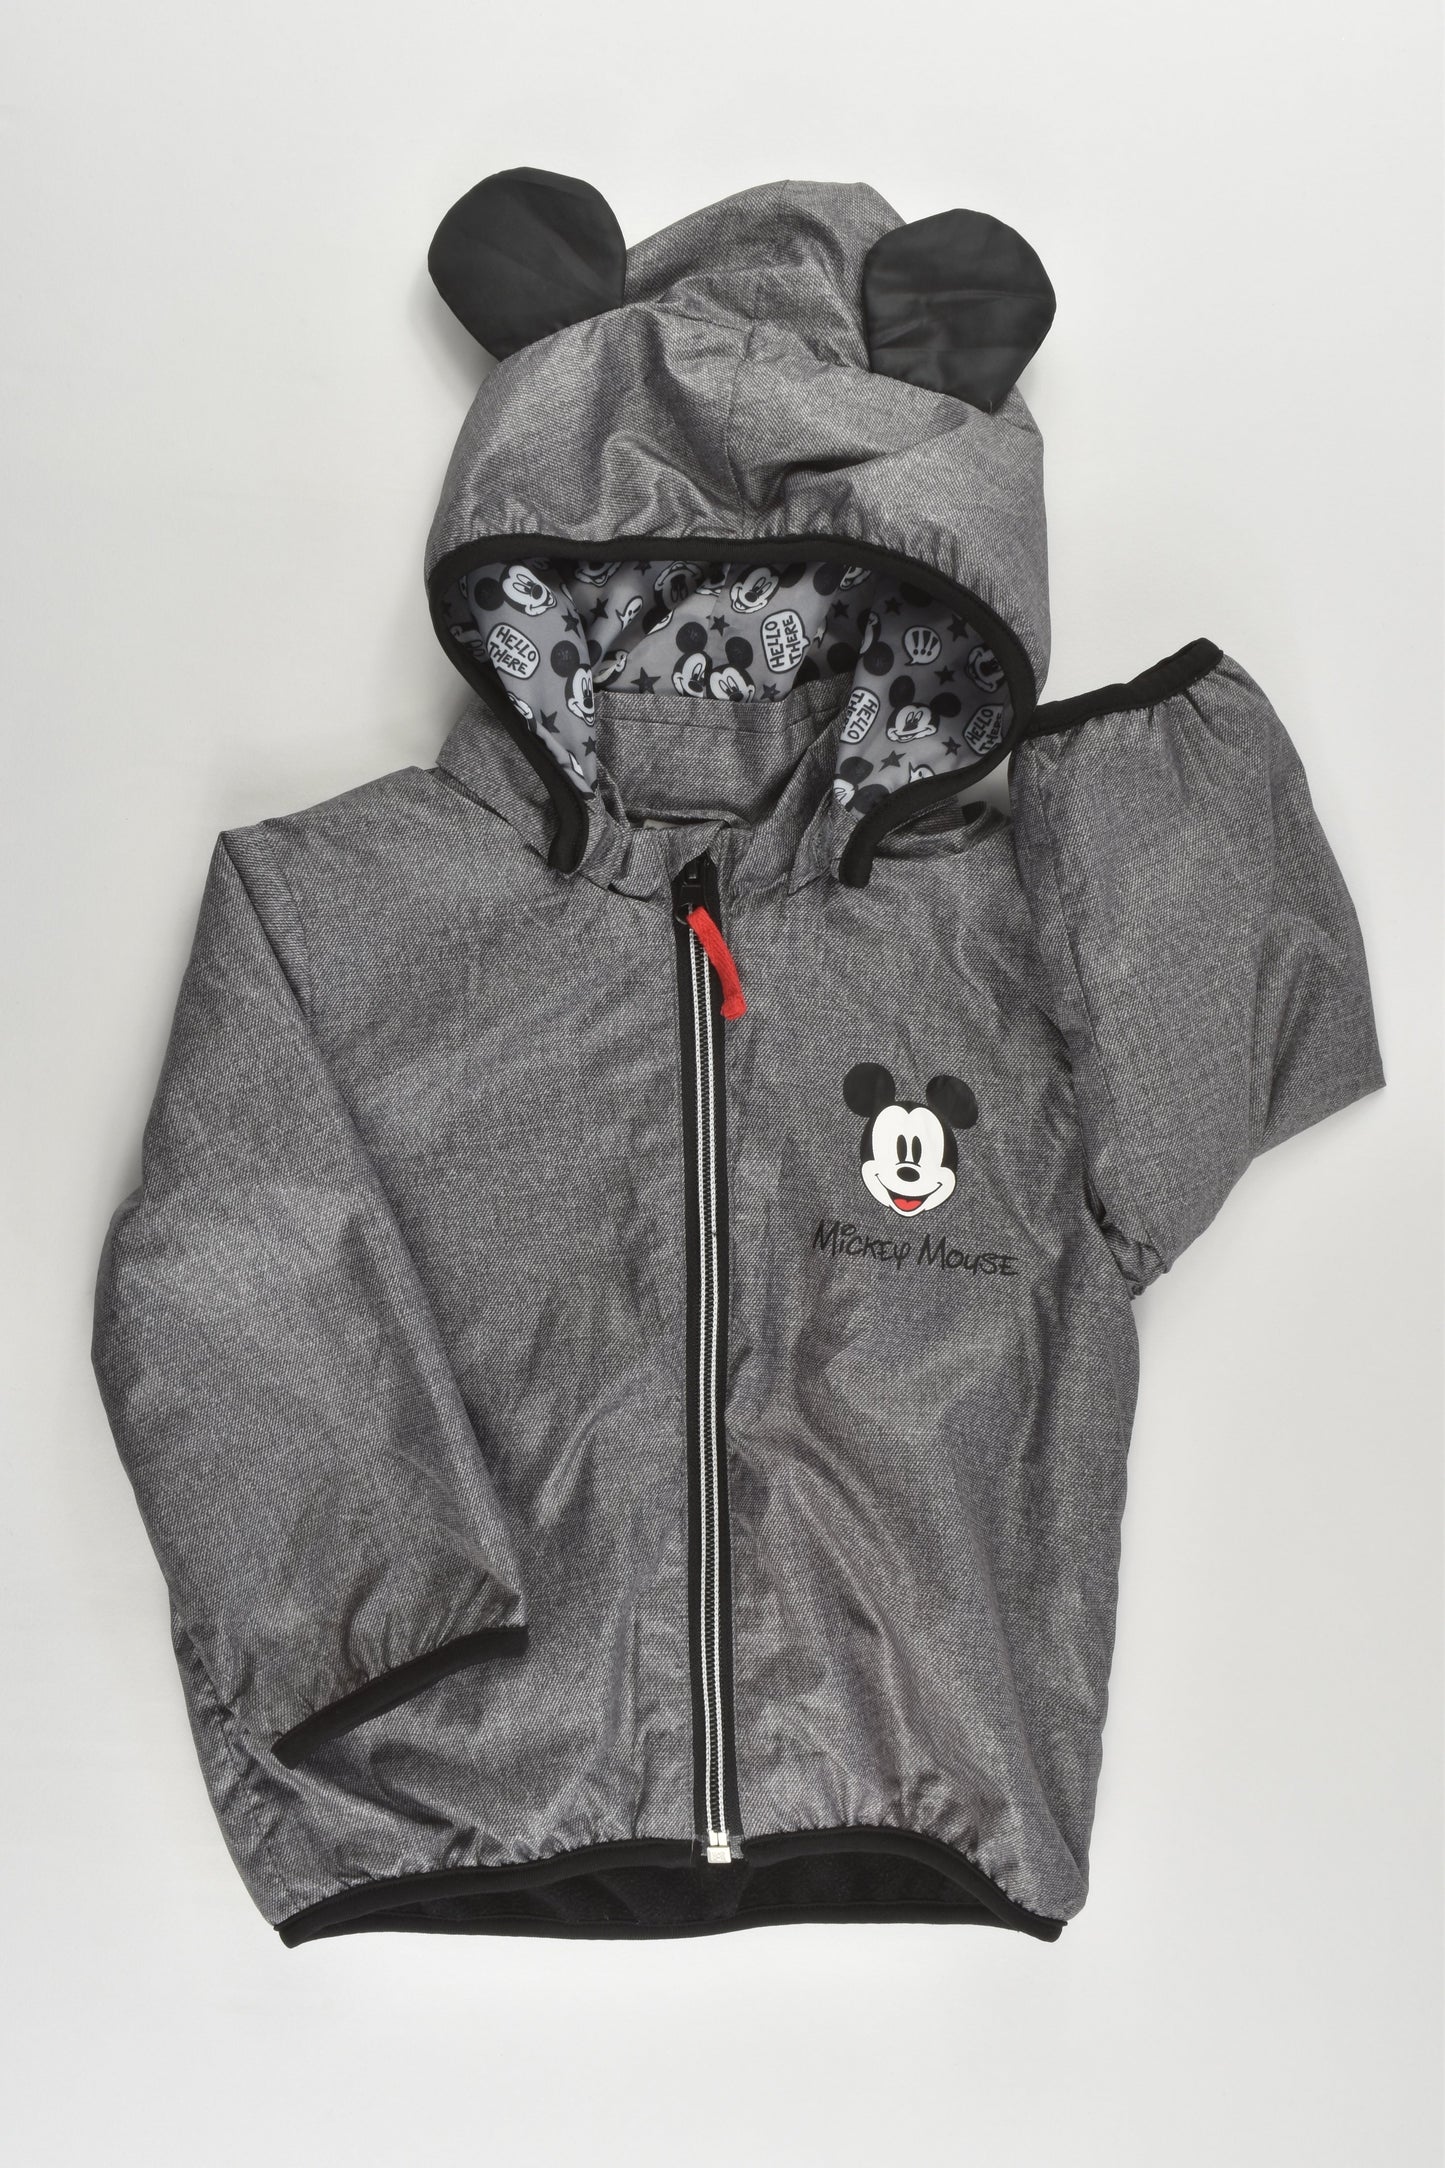 H&M Size 1 (80 cm) Fleece Lined Mickey Mouse Jacket